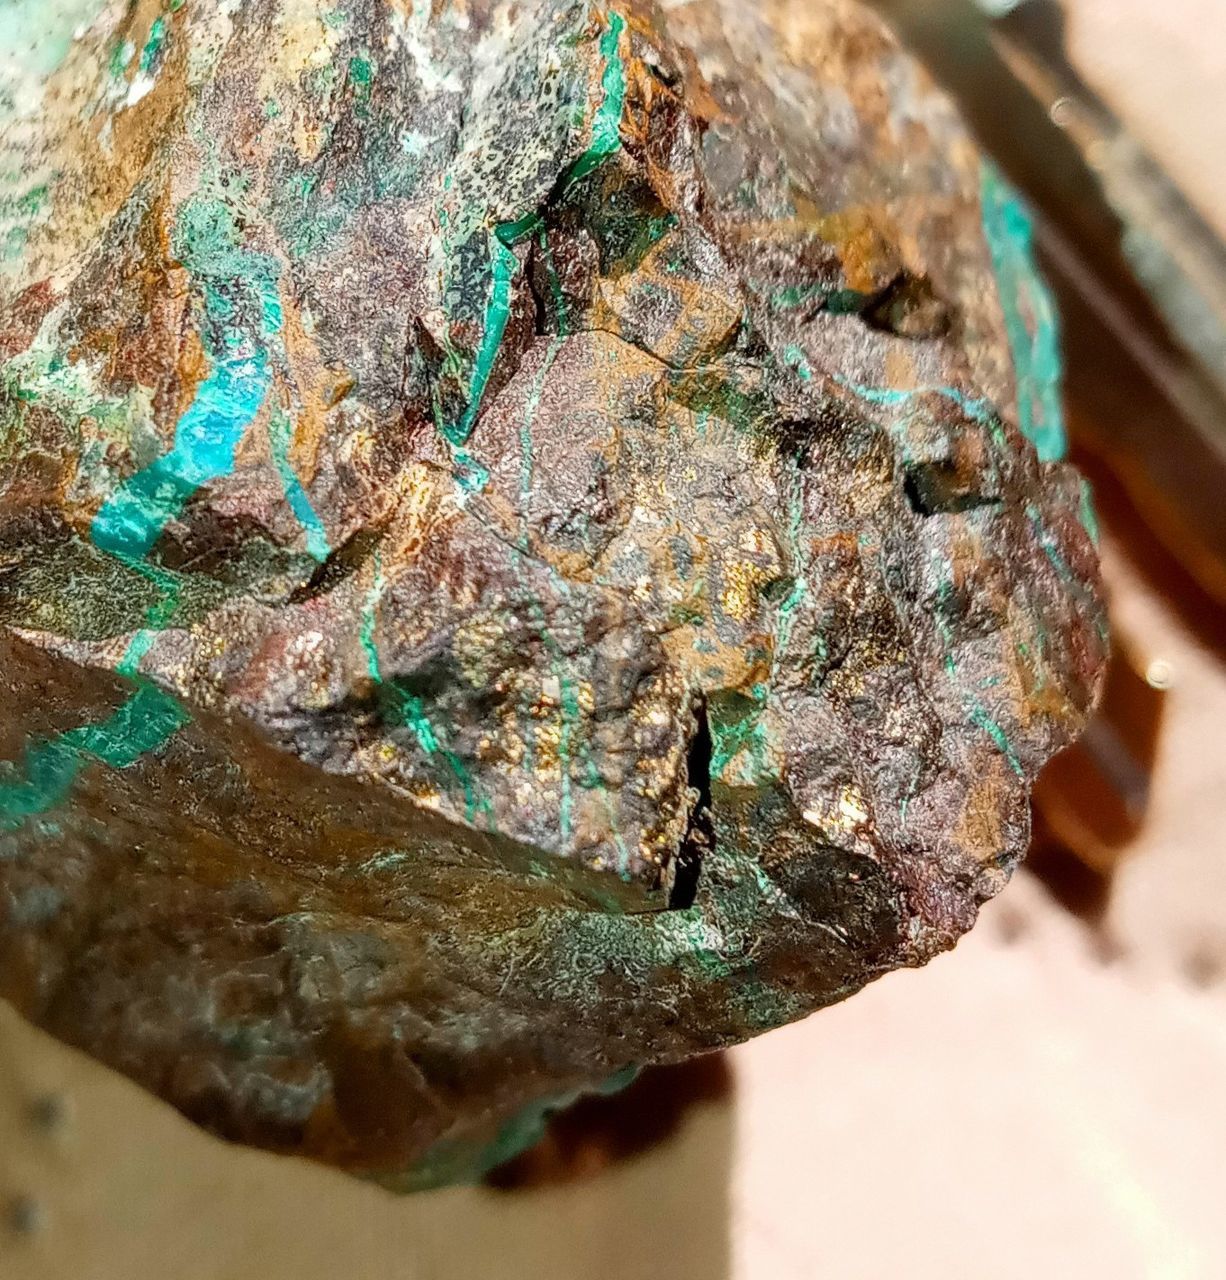 mineral, close-up, jewellery, nature, rock, no people, green, outdoors, metal, day, textured, geology, fashion accessory, shiny